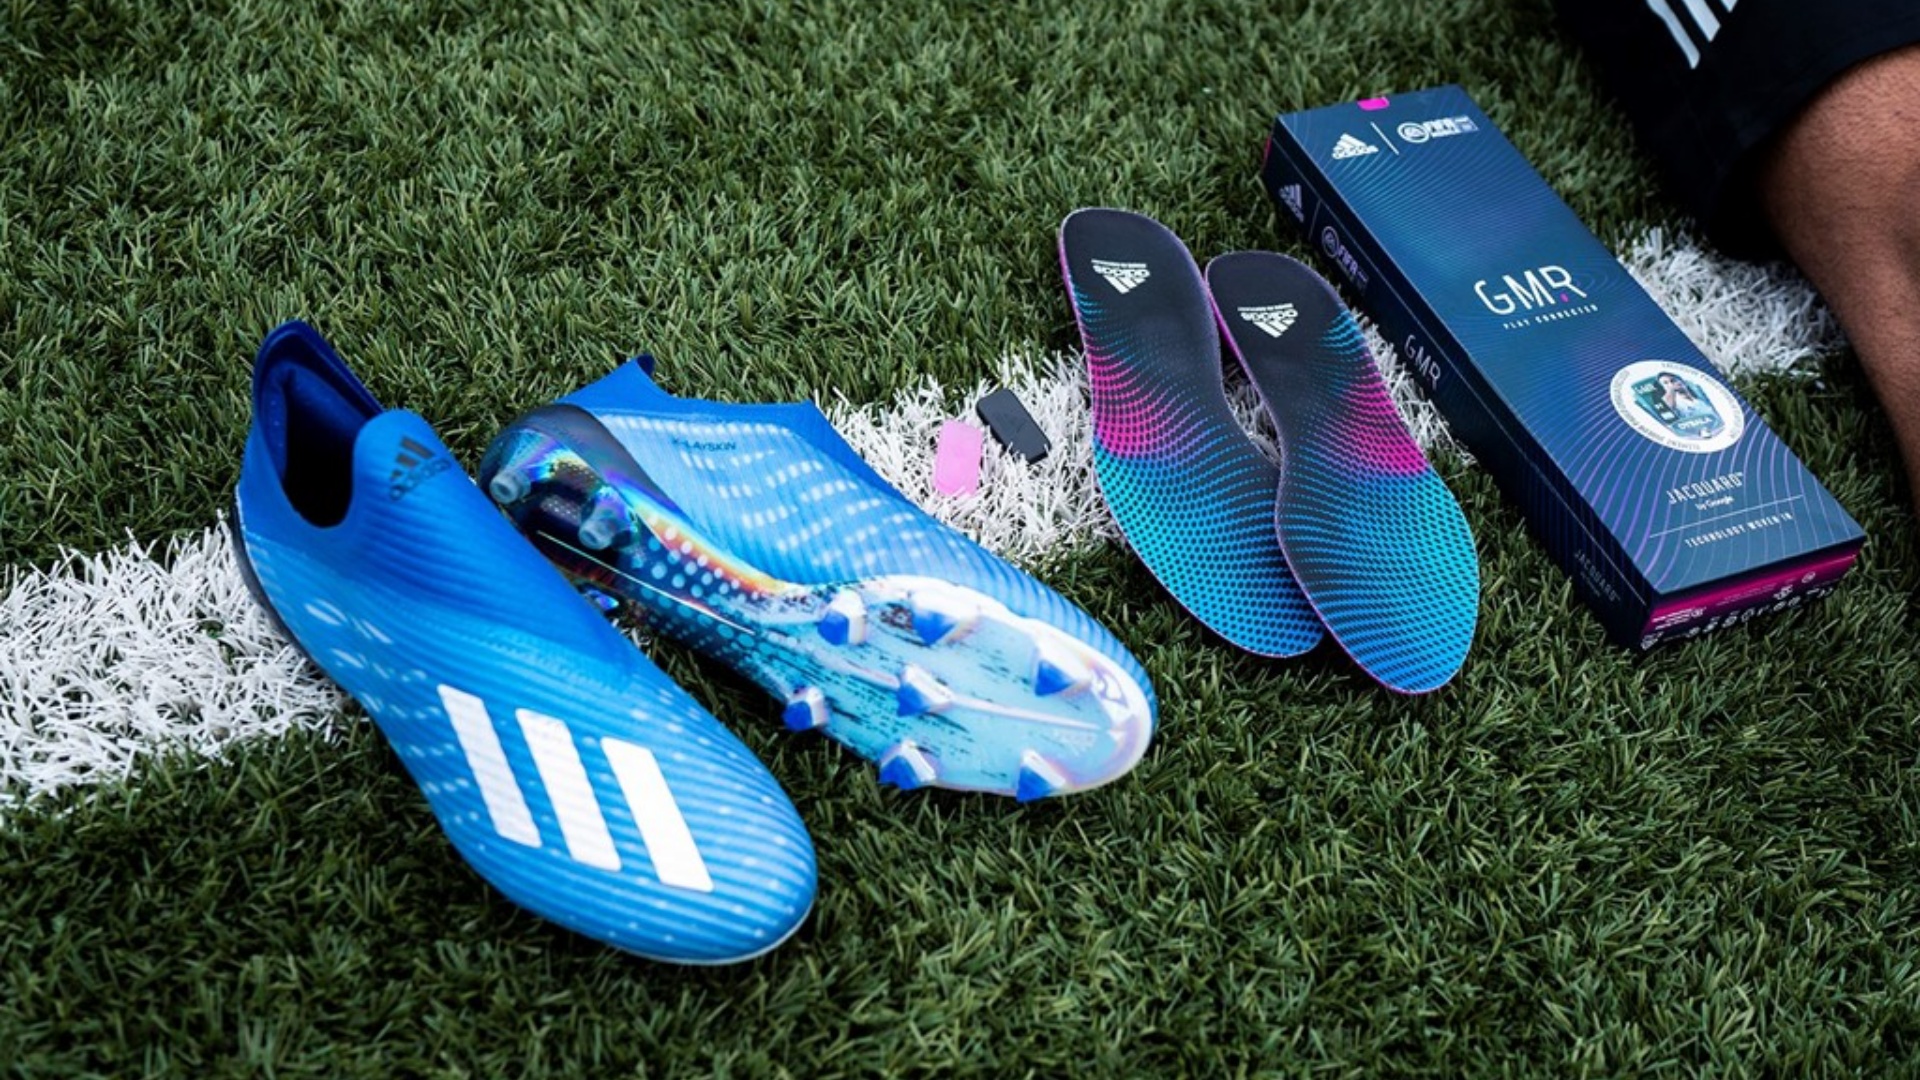 Adidas made a football boot insole that 